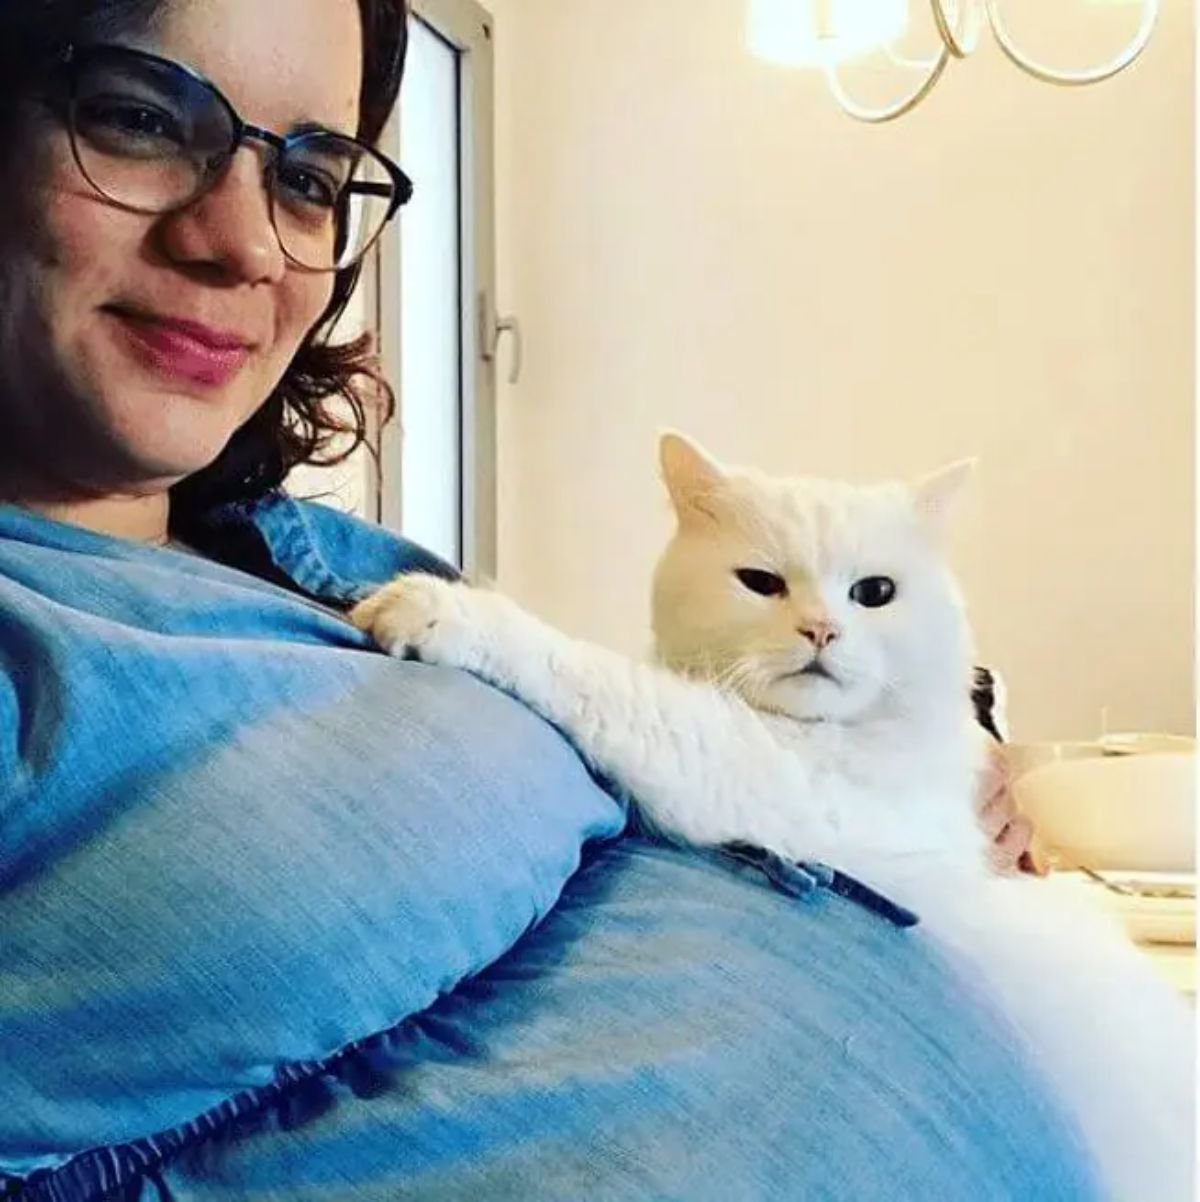 white cat holding onto a pregnant person laying in bed